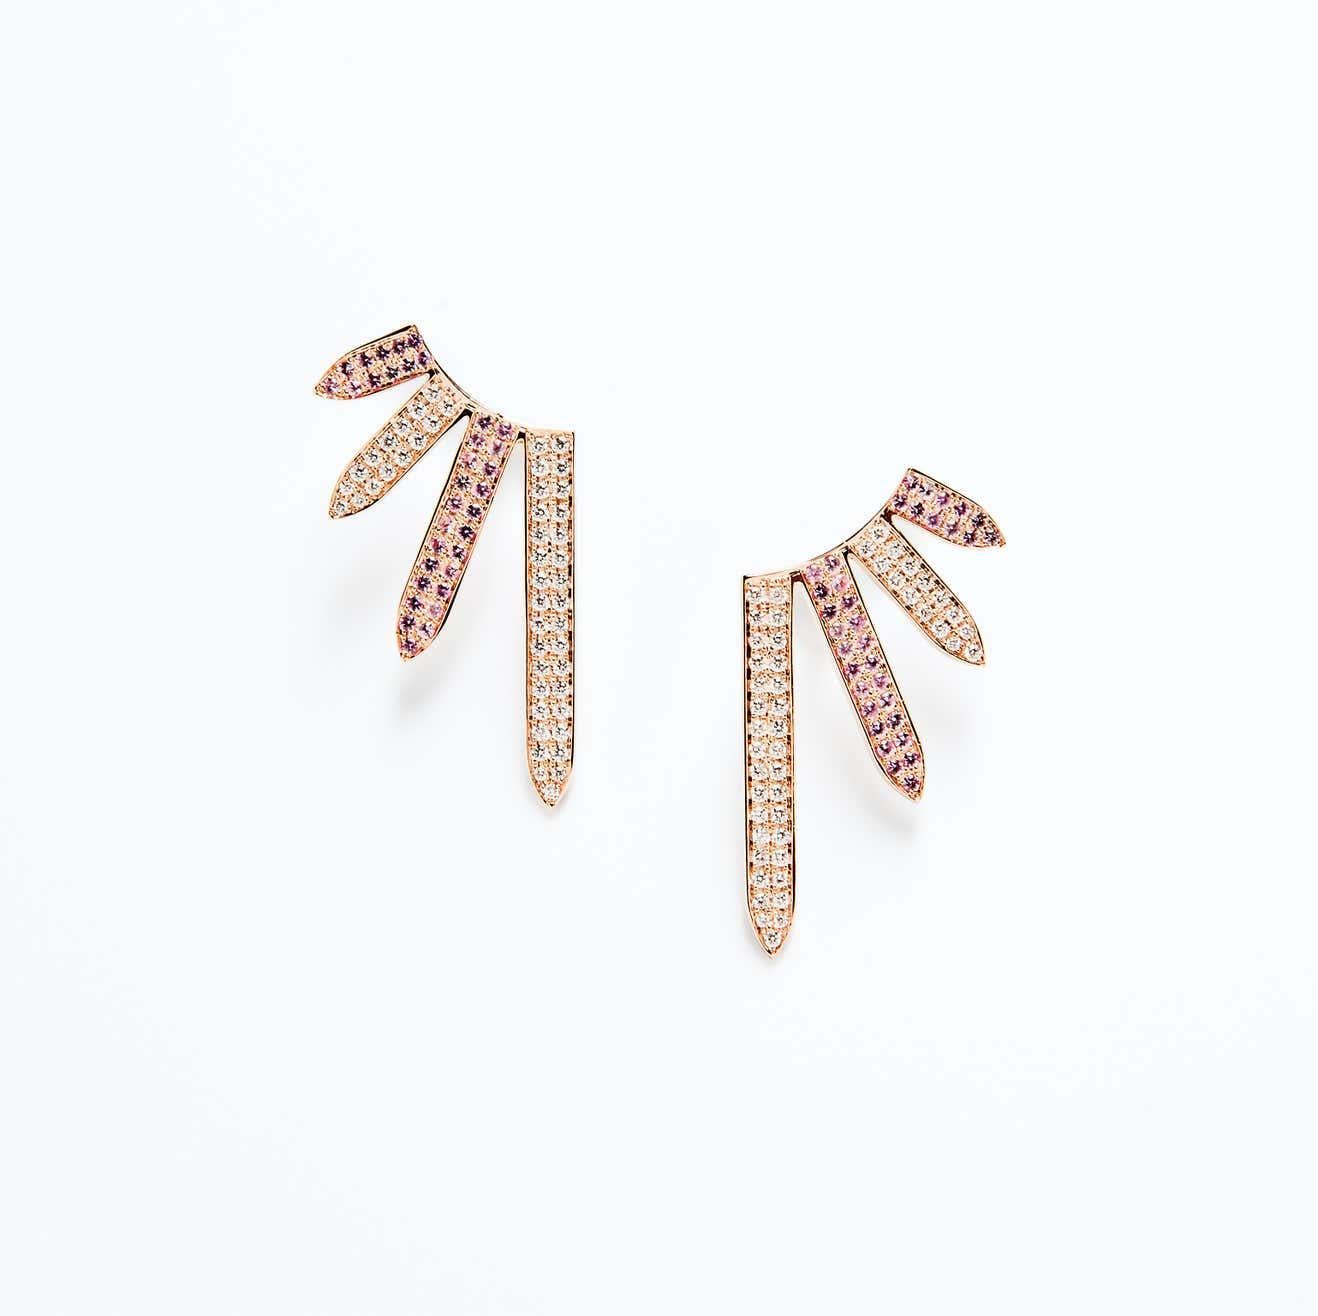 Taking style cues from stained glass art, these ear climbers are a bold choice for contemporary styles.

18K Rose Gold
Diamond TCW is 0.75
Pink sapphire TCW is 0.75
Friction post and back closures
Length is 1 inch and width is 0.75 inches